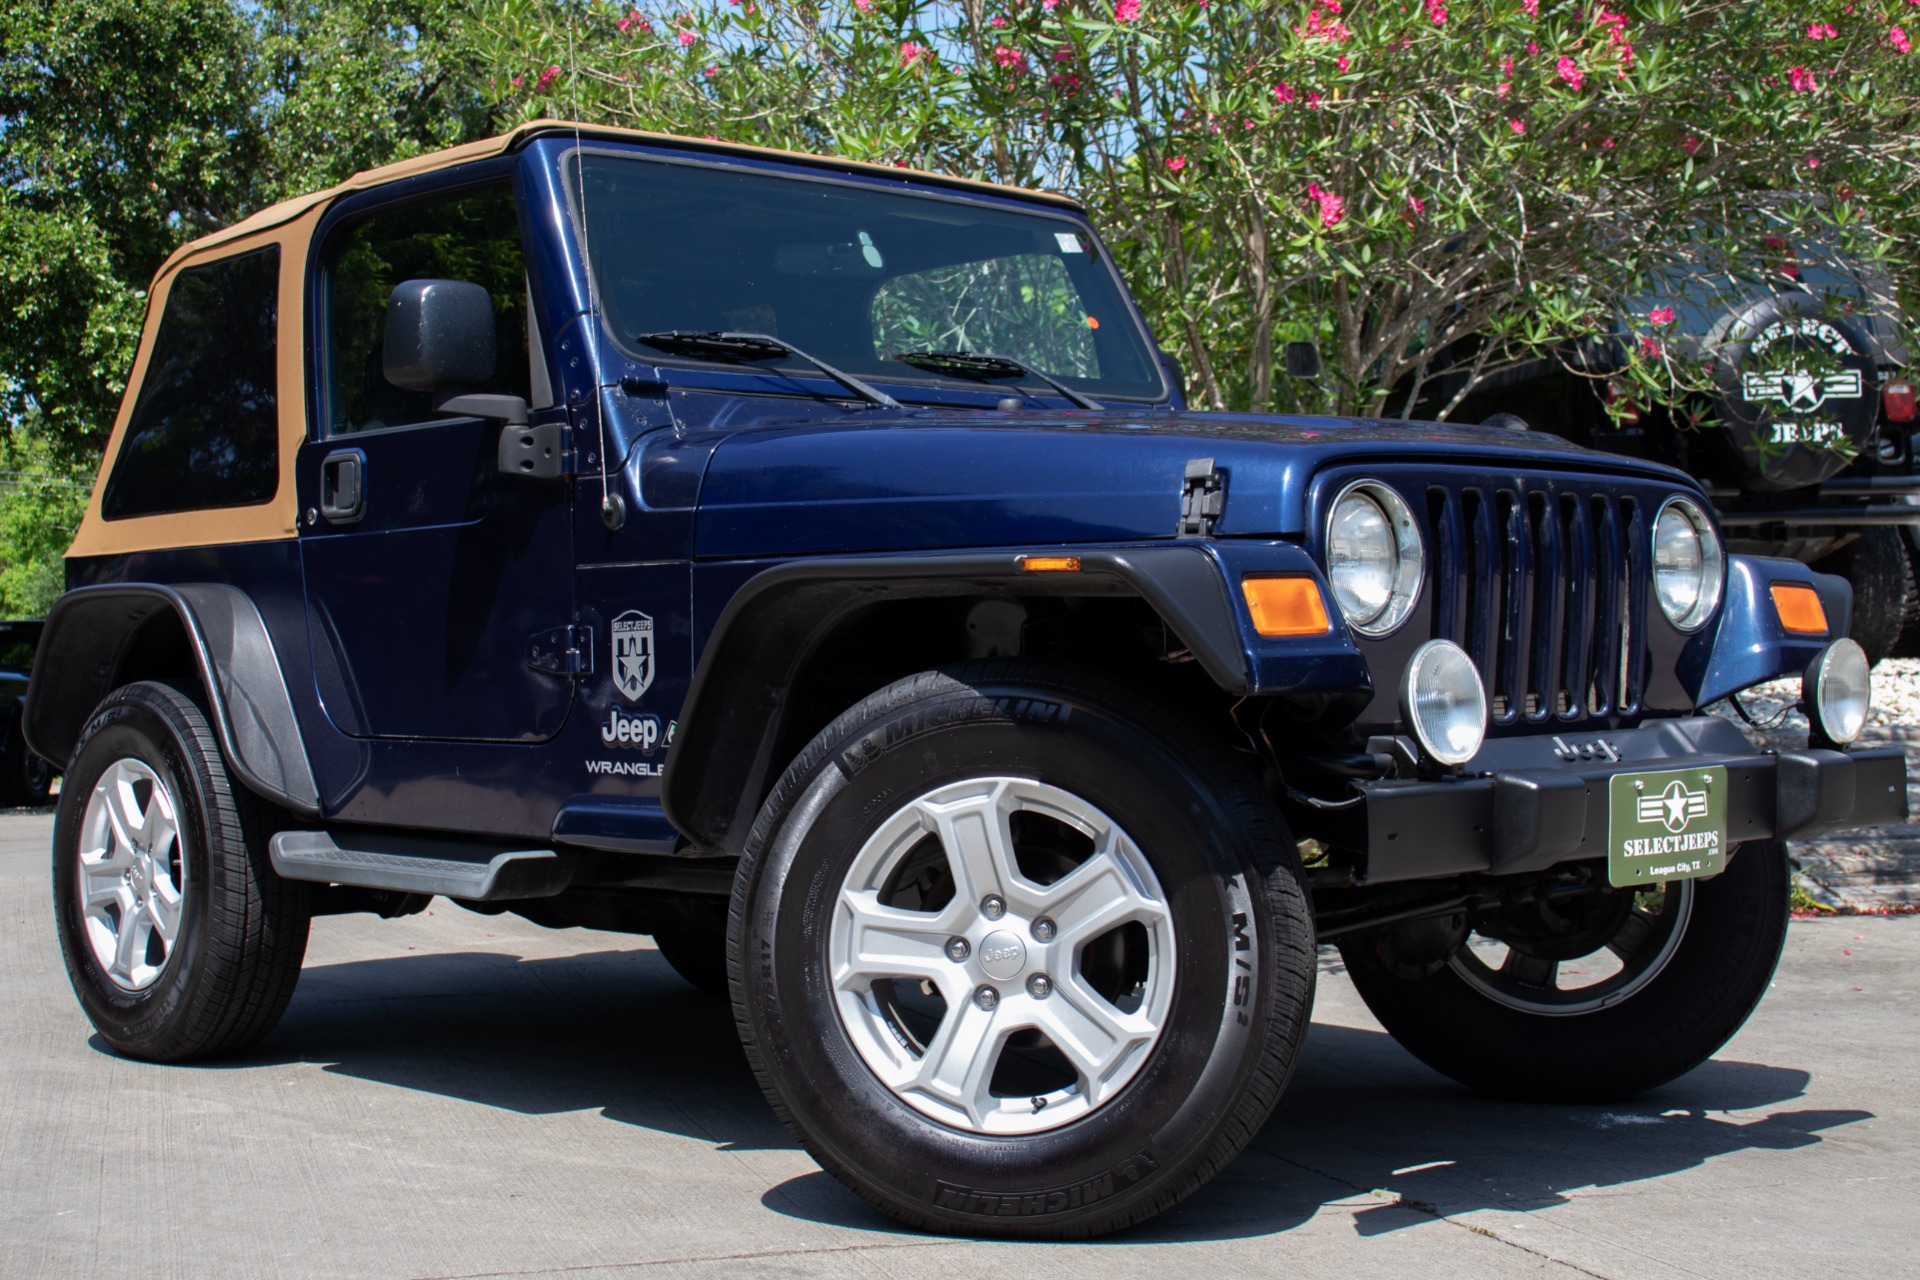 Used 2006 Jeep Wrangler X For Sale ($13,995) | Select Jeeps Inc. Stock  #753576